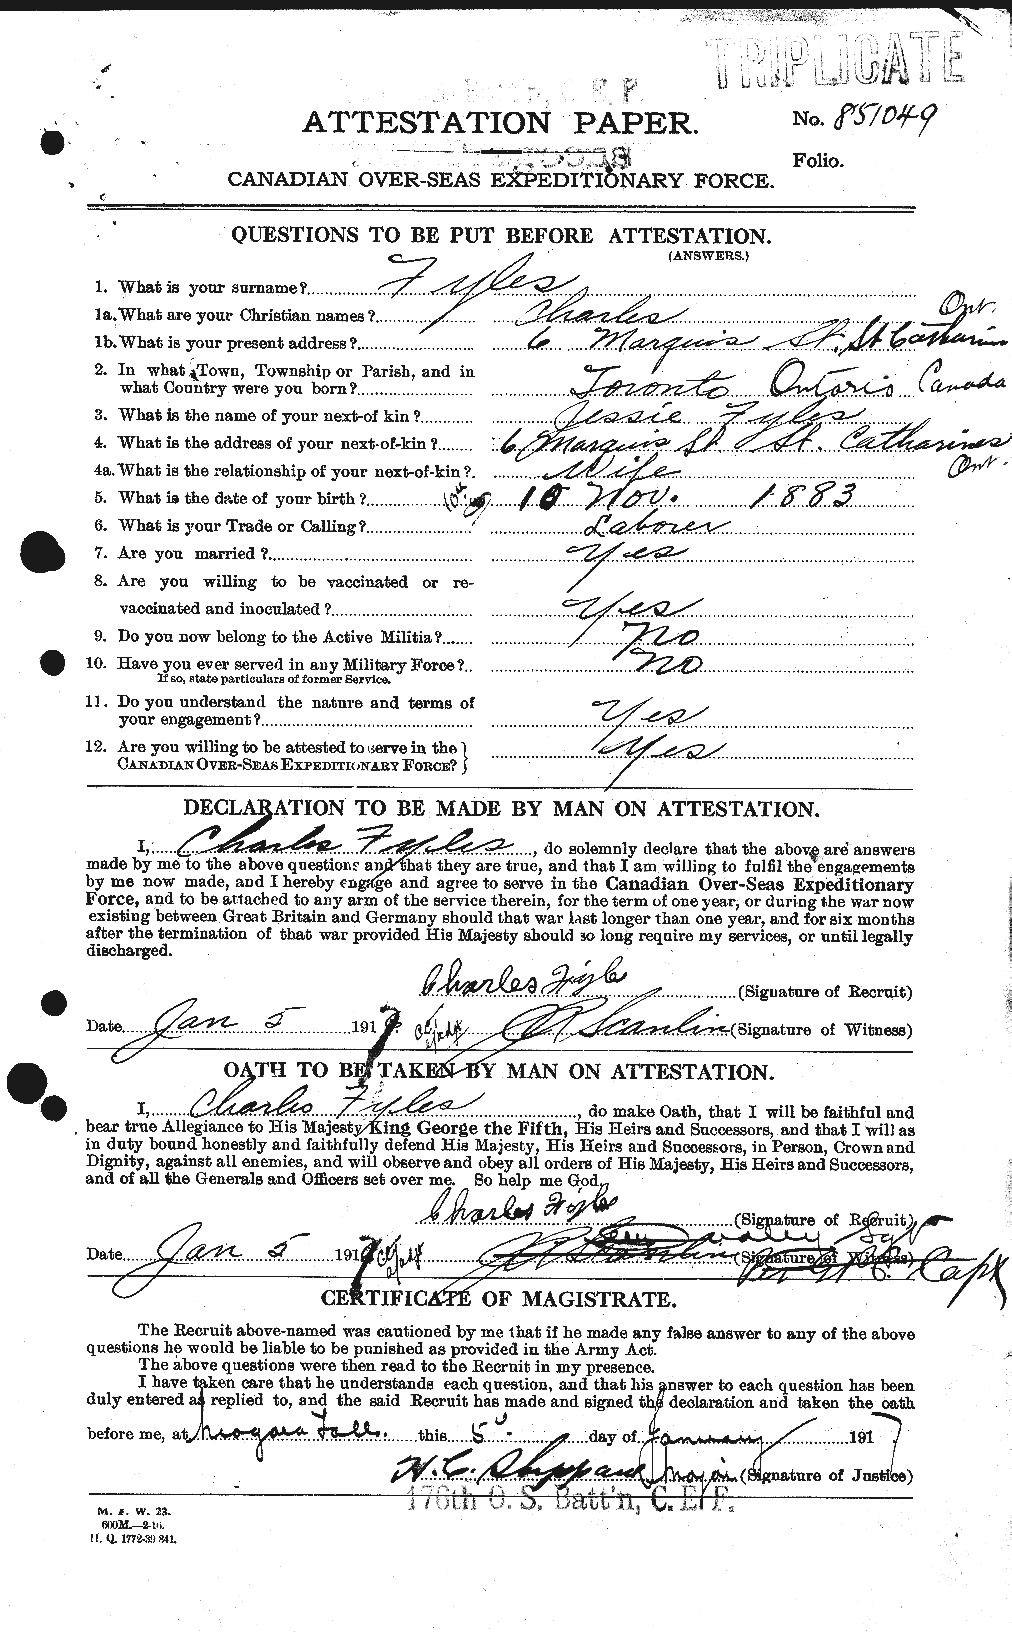 Personnel Records of the First World War - CEF 338873a